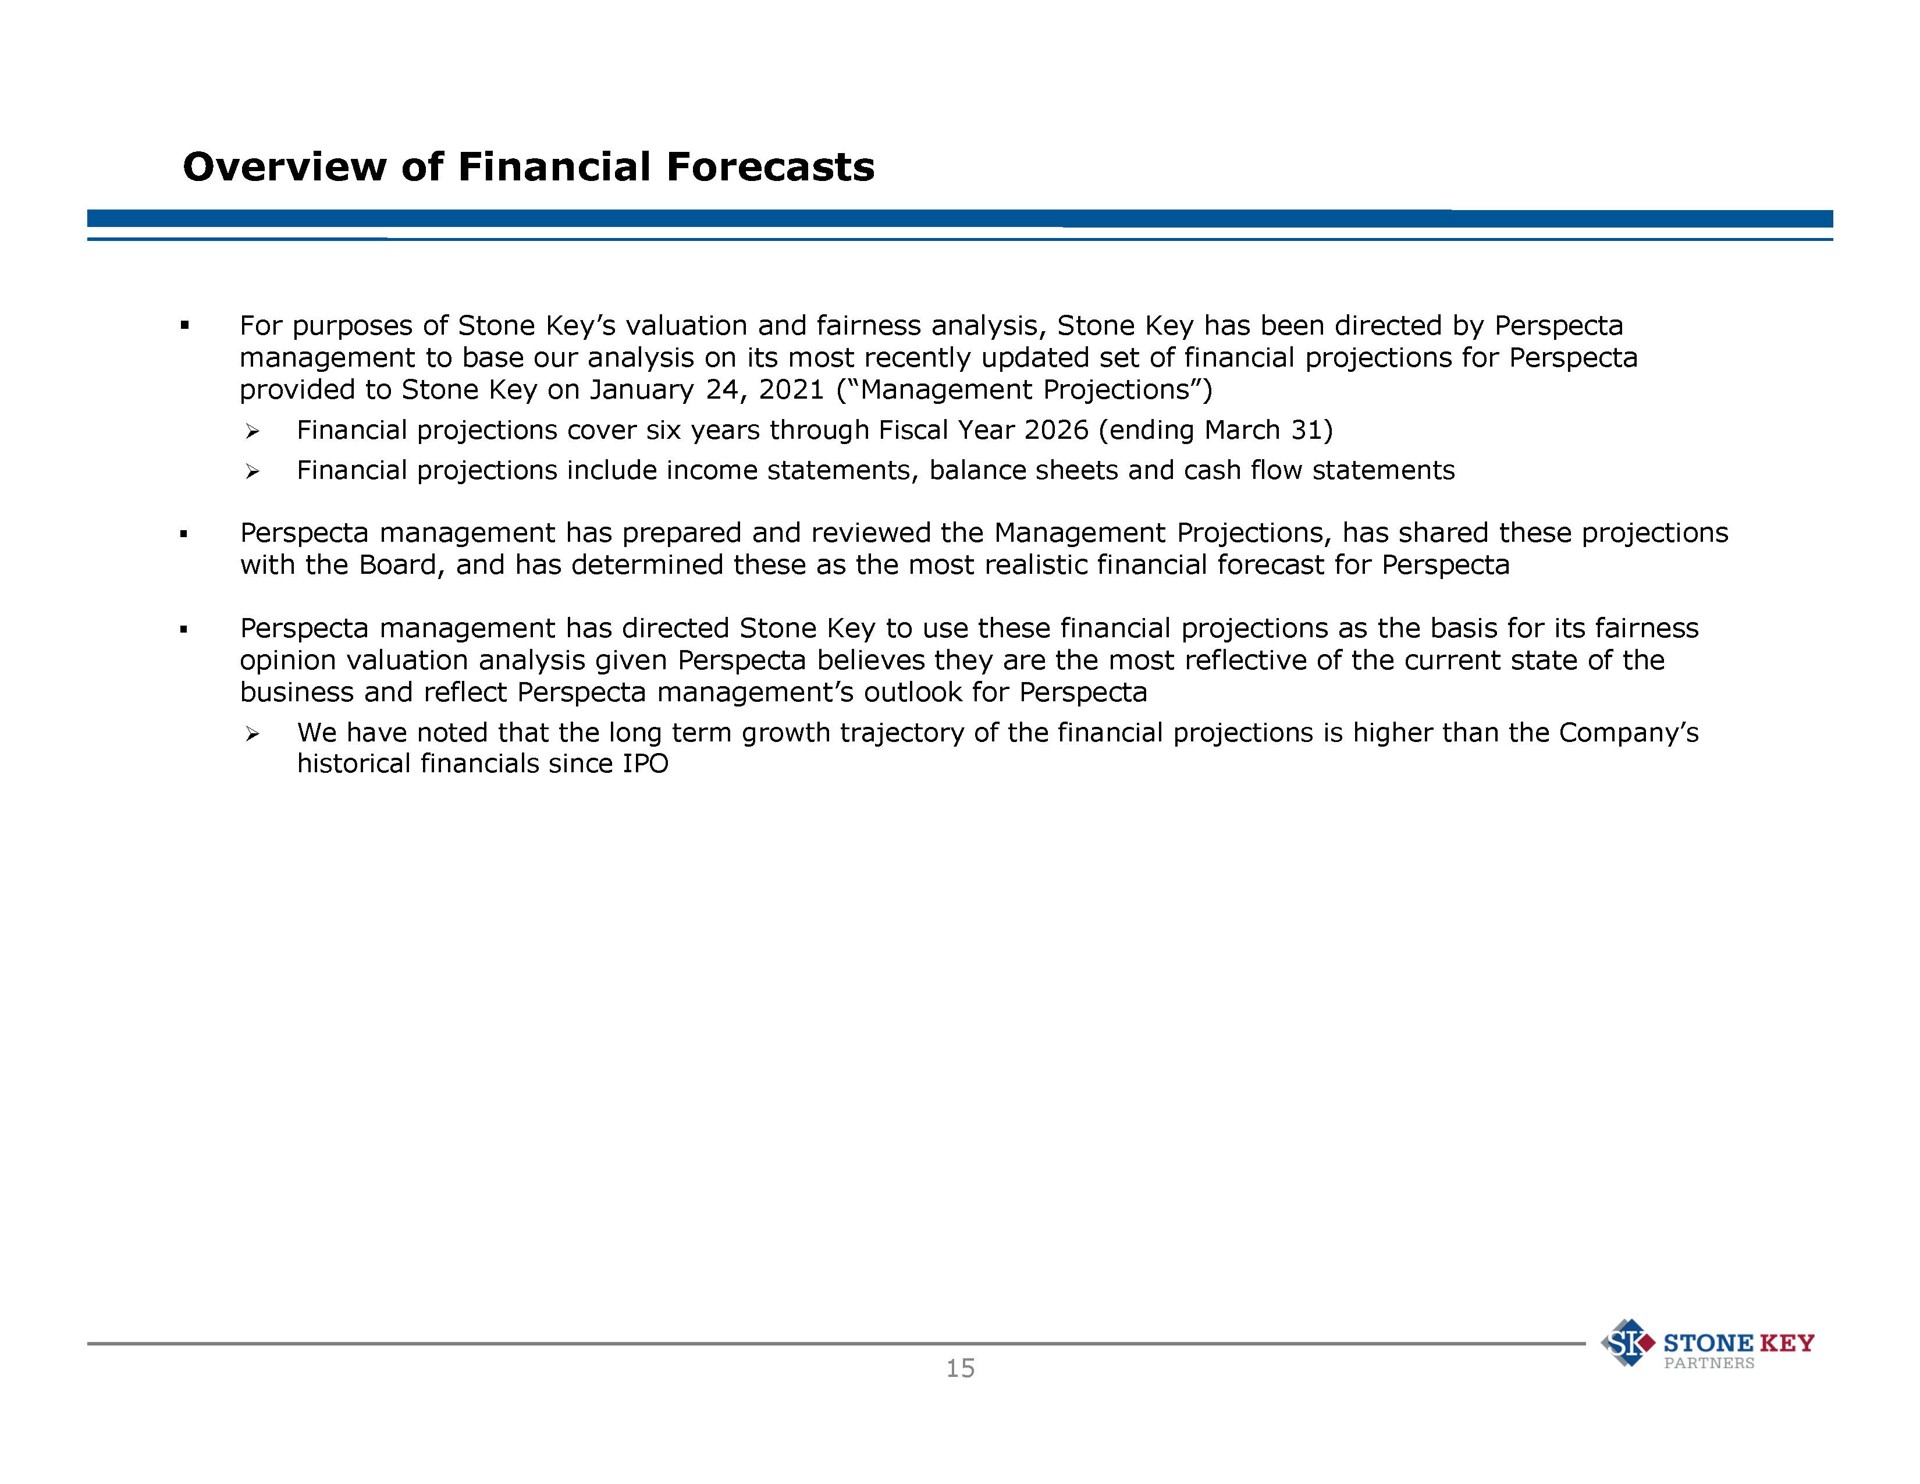 overview of financial forecasts stone key | Stone Key Partners